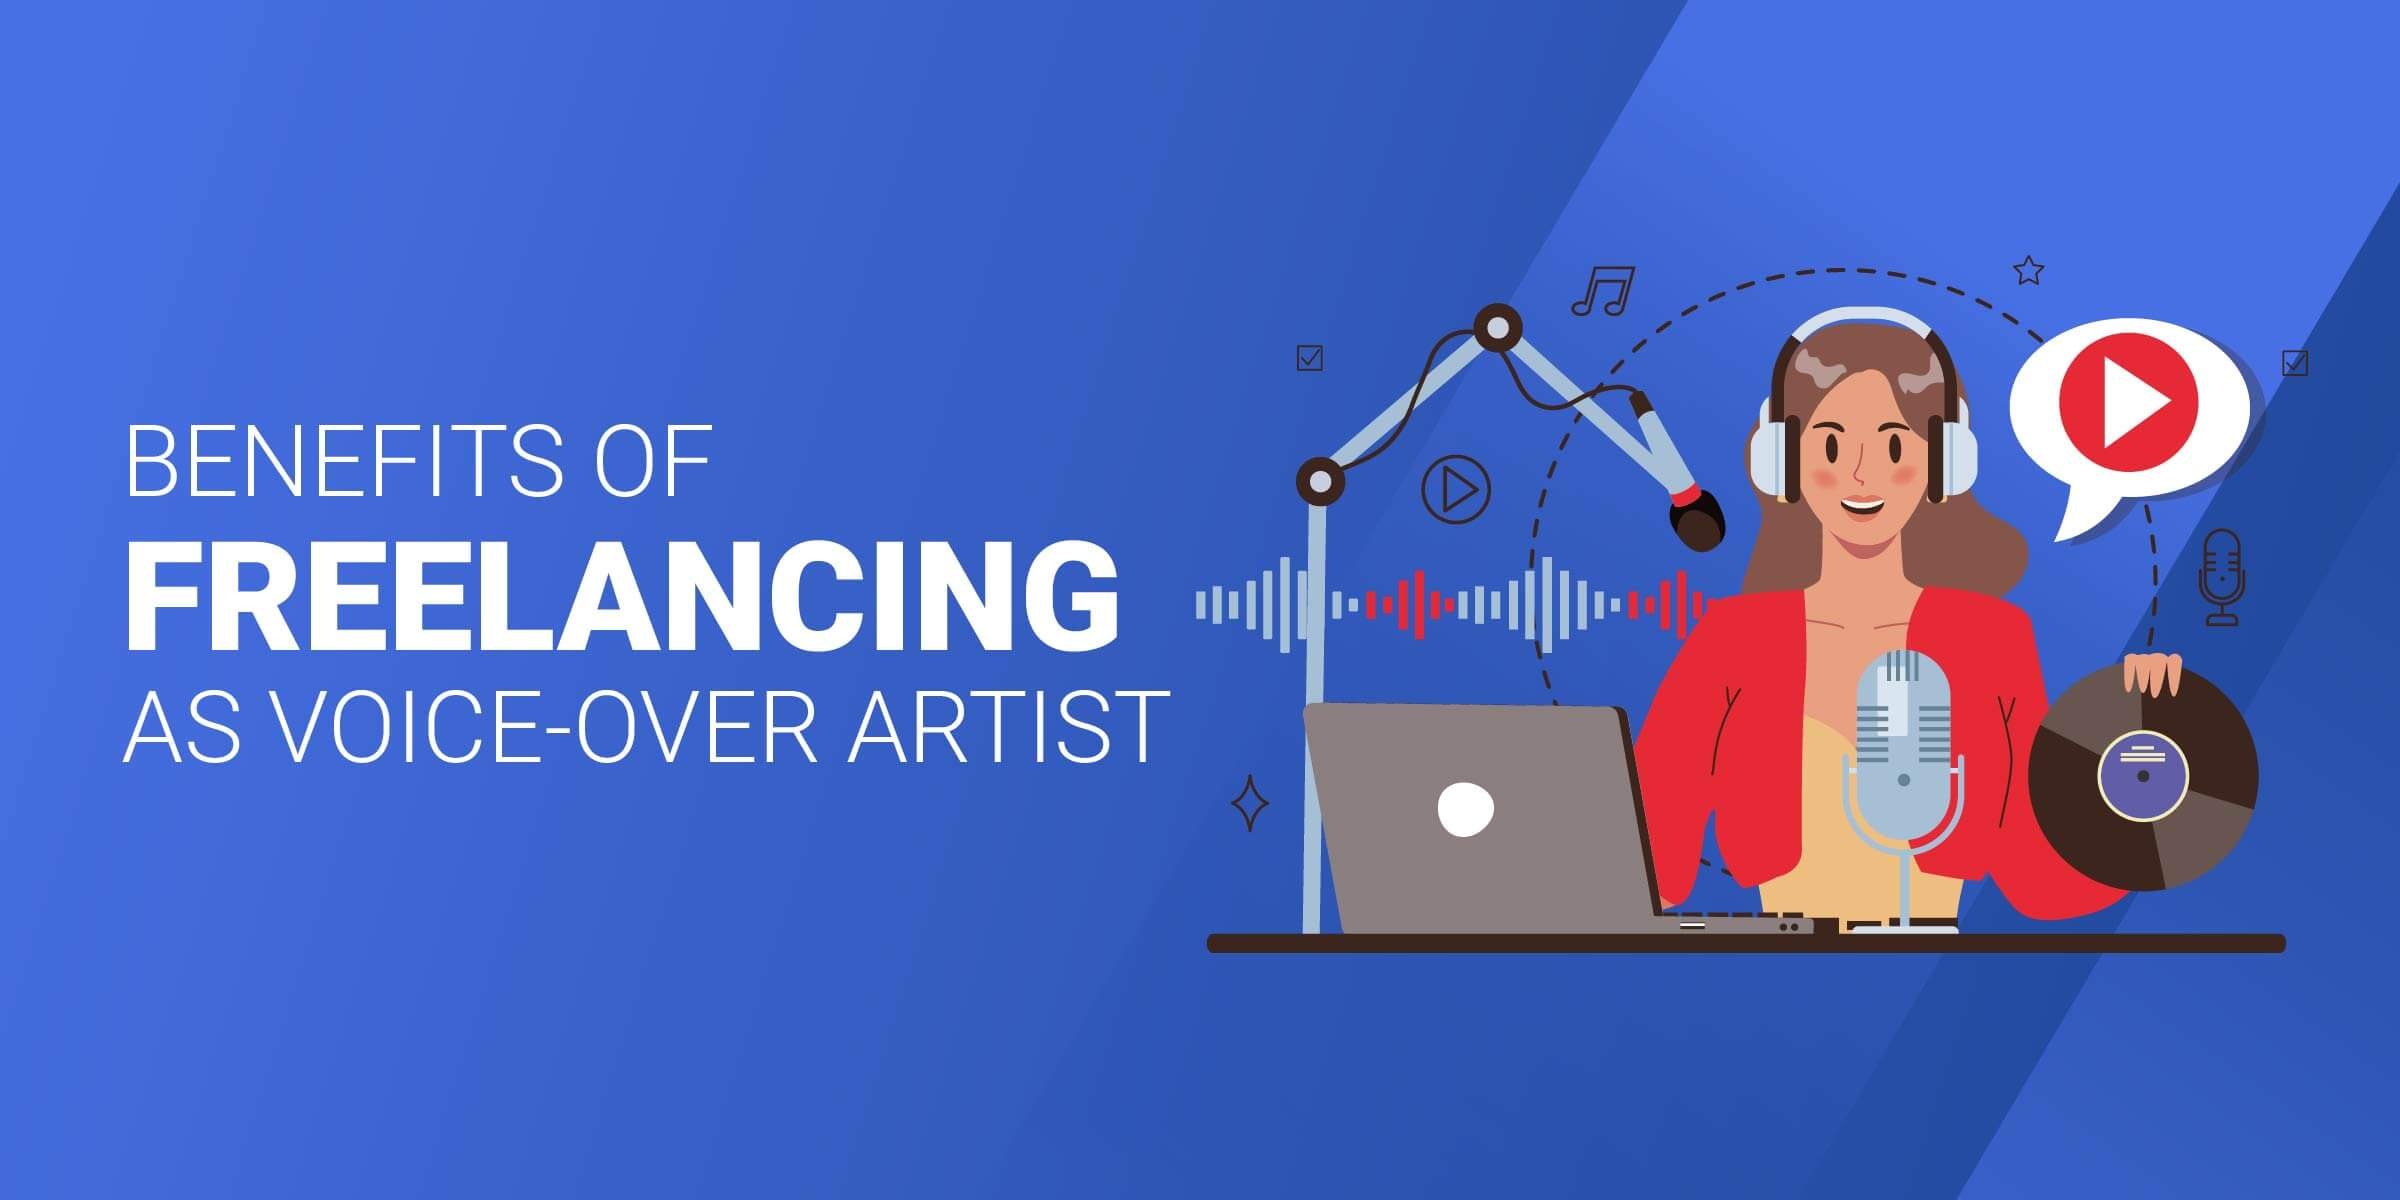 Benefits of Freelancing as Voice Over Artist